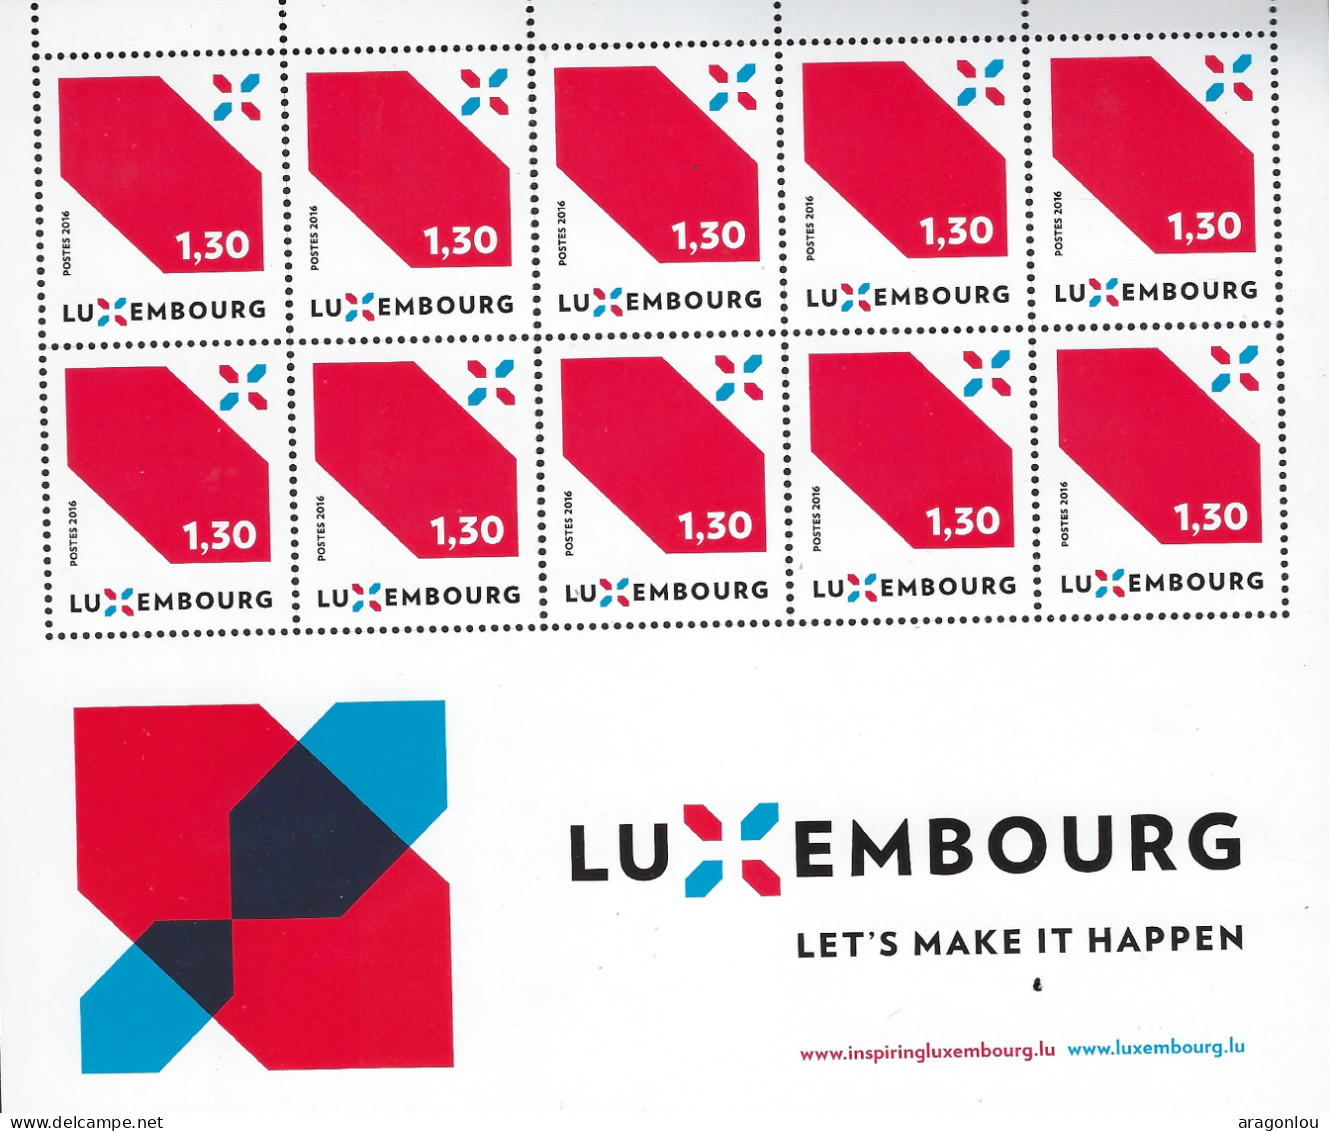 Luxembourg - Luxemburg - Timbres - Feuillet  à  10 Timbres X  1,30 -  2016  LUXEMBOURG  LET'S MAKE IT HAPPEN  MNH** - Blocs & Hojas